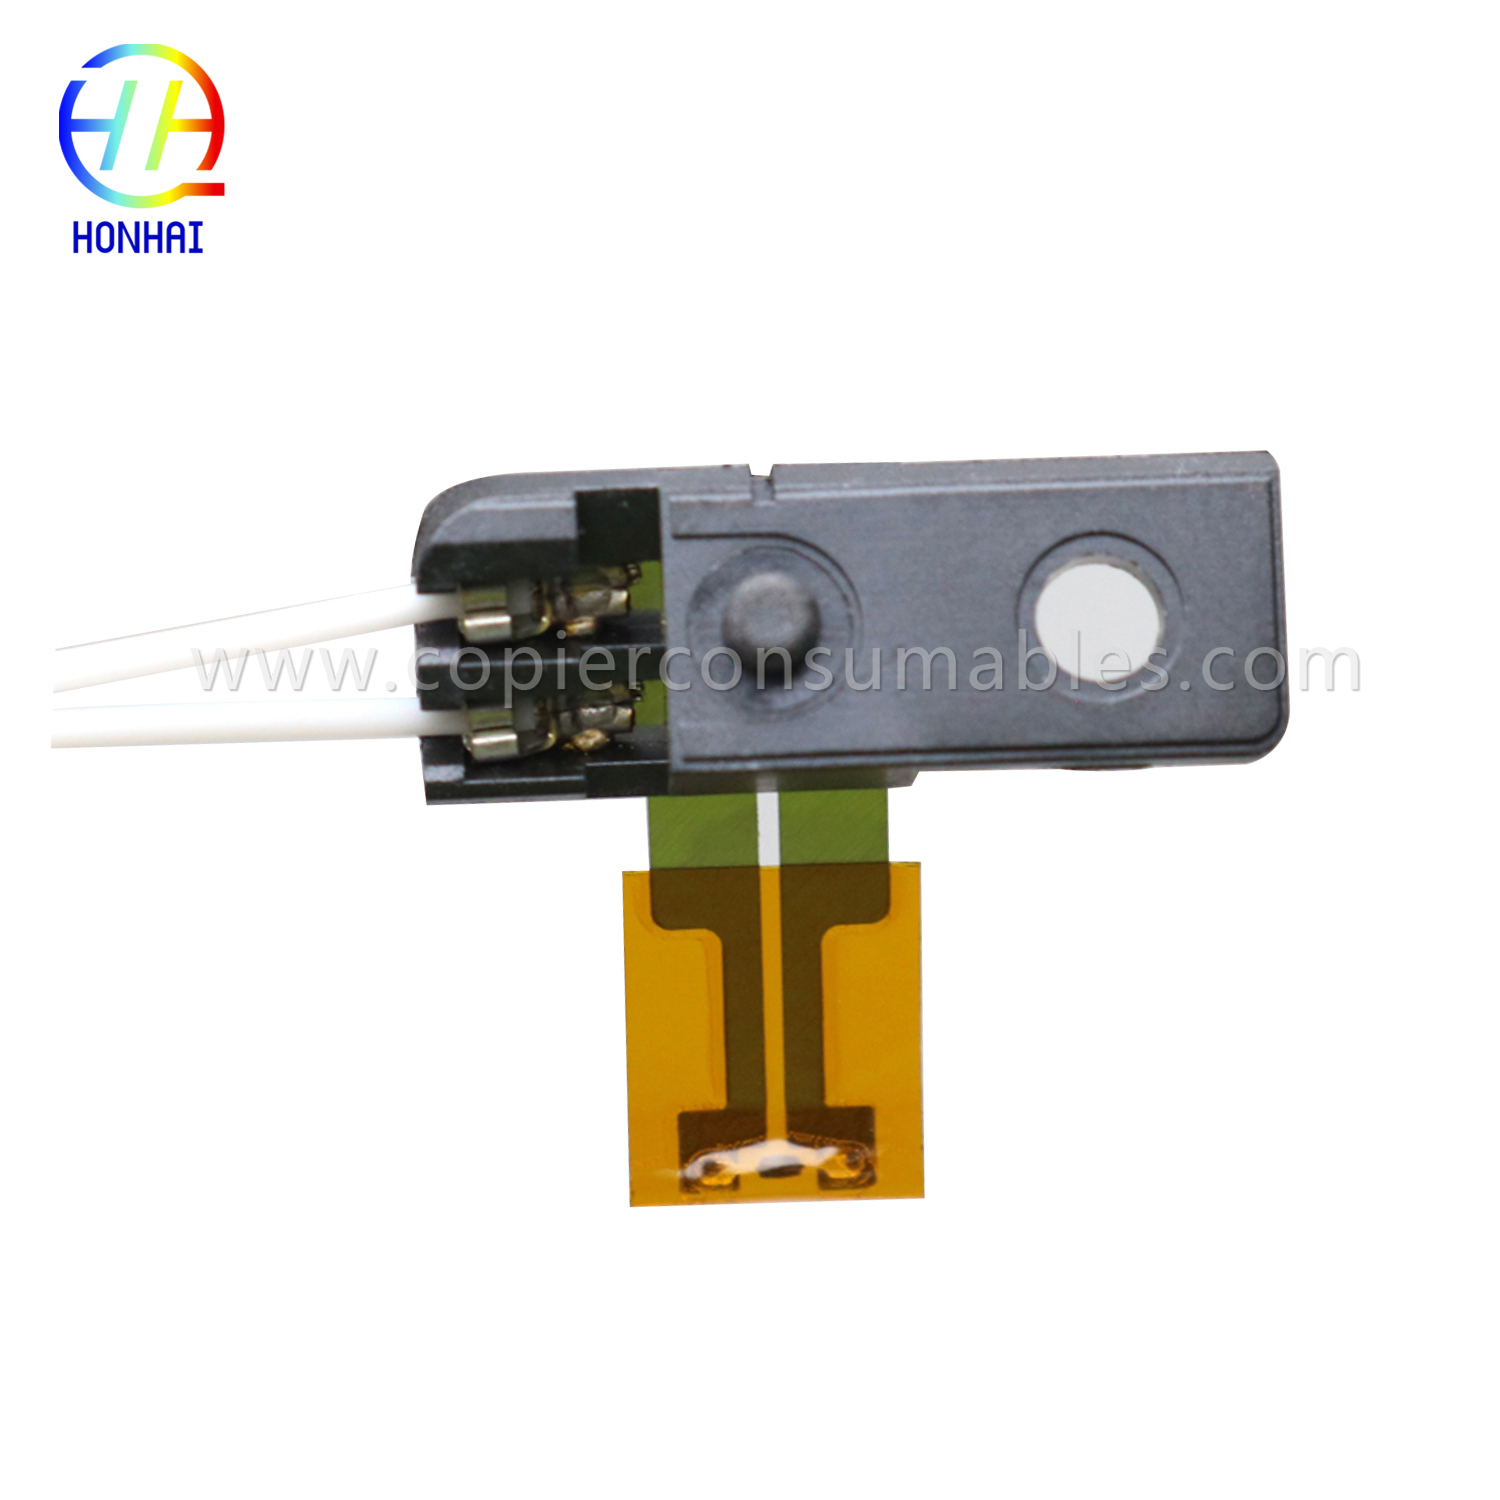 Fuser Unit Thermistor for Xerox P4 3370 3375 3373 7830 7835 7845 7855 7525 7535 7545 7556 4470 4475 5570 5575 Original Disassembly Accessories  (3)